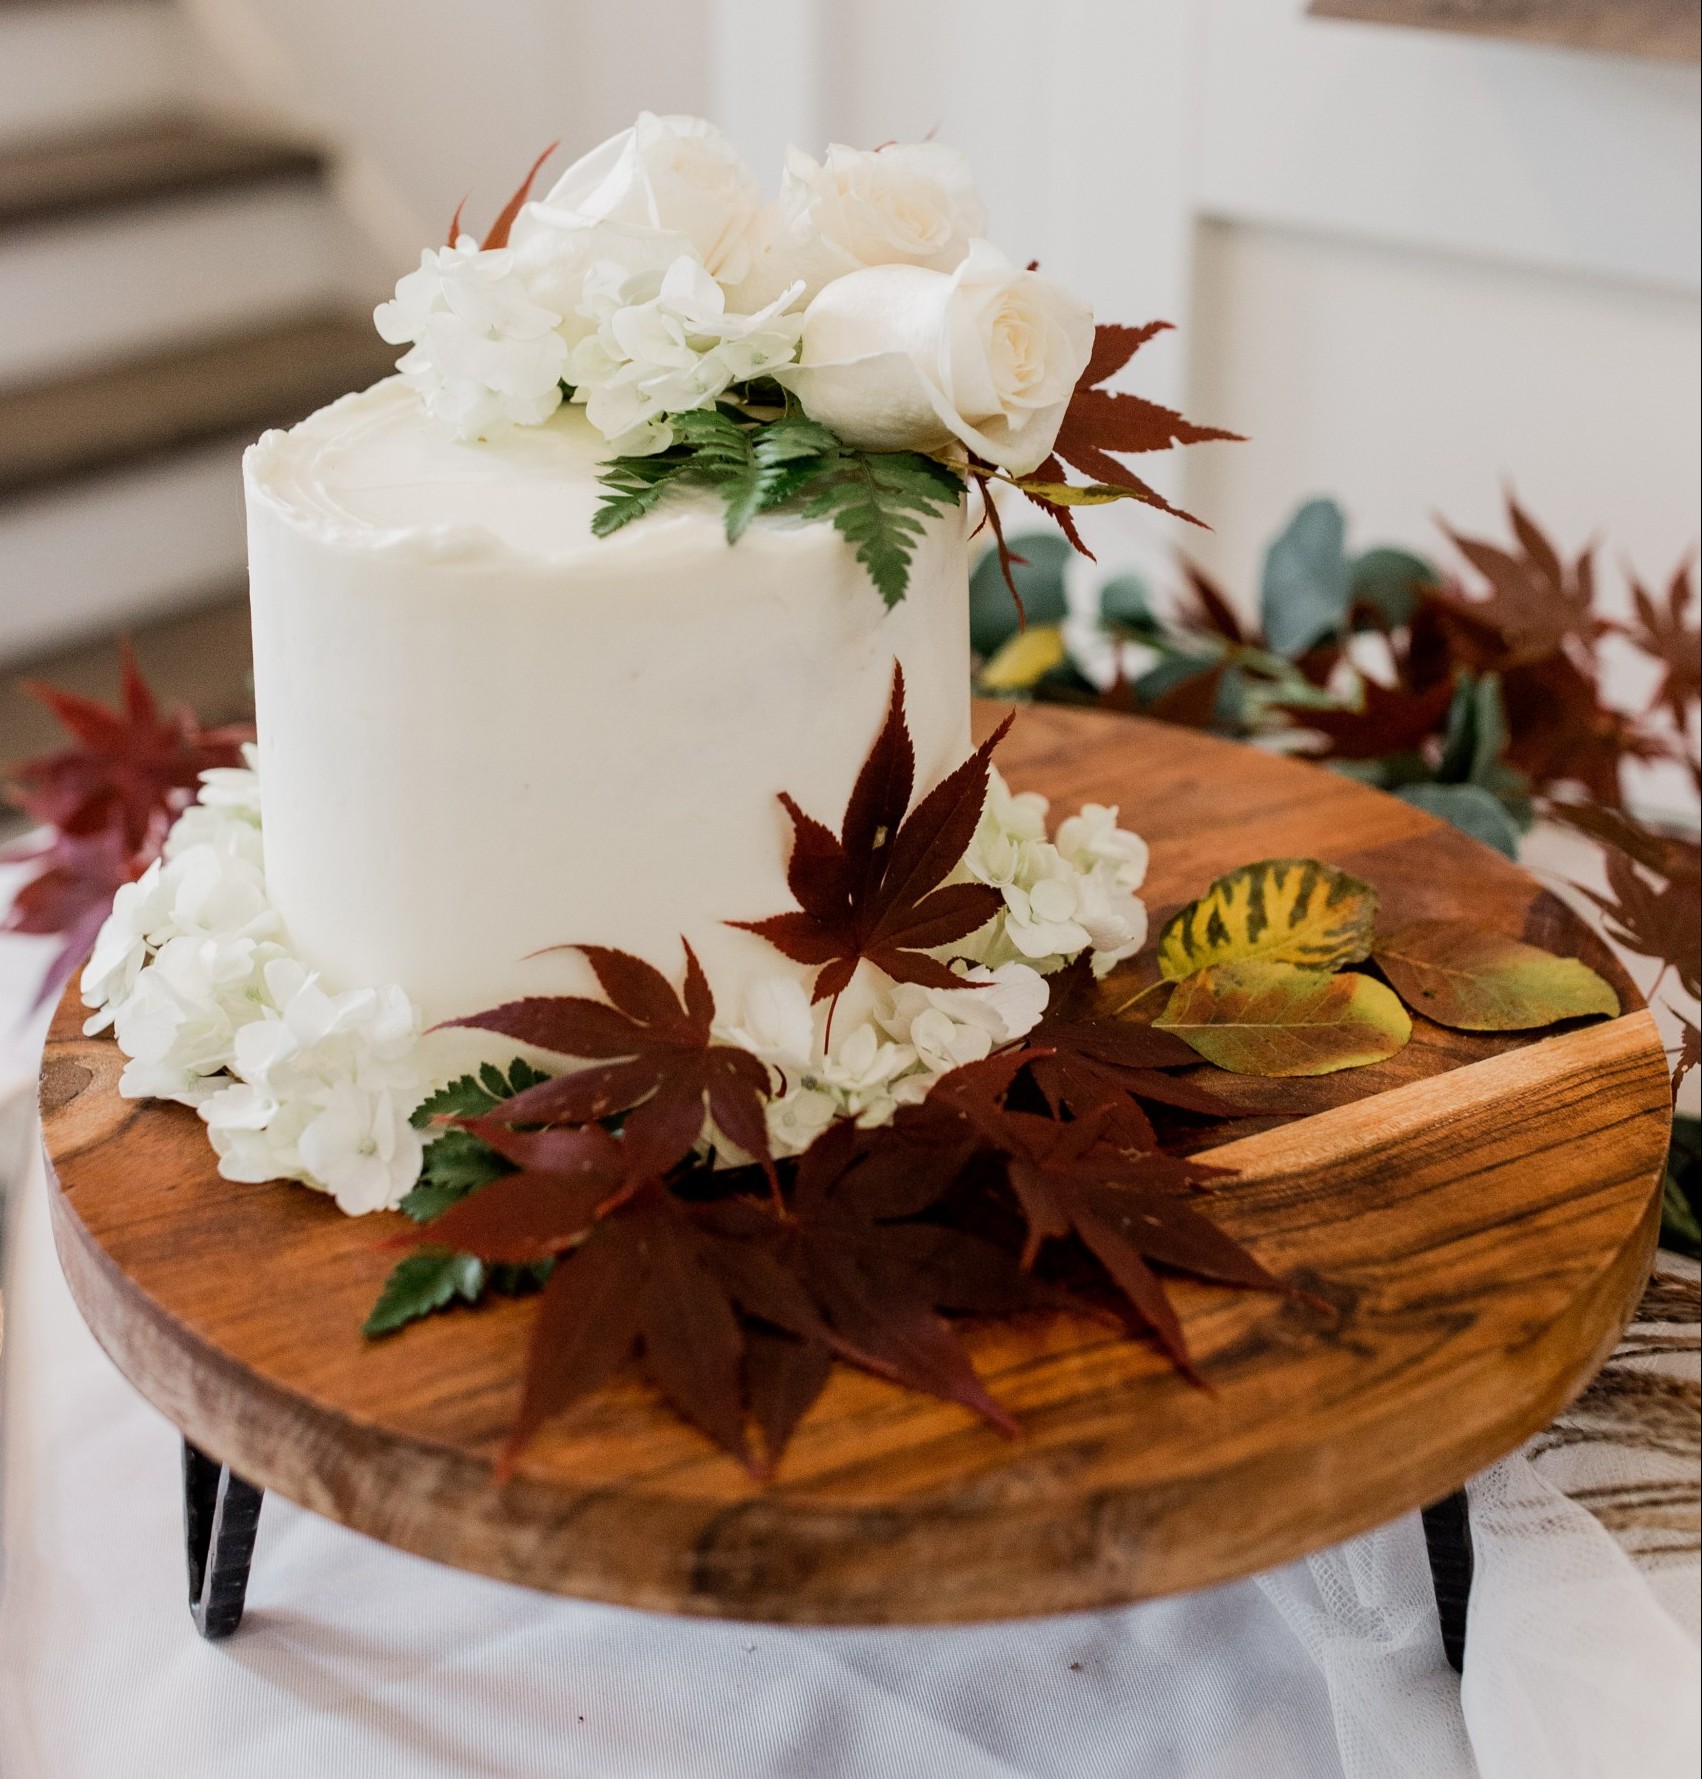 A white wedding cake decorated in fall leaves sits on a pedestal.